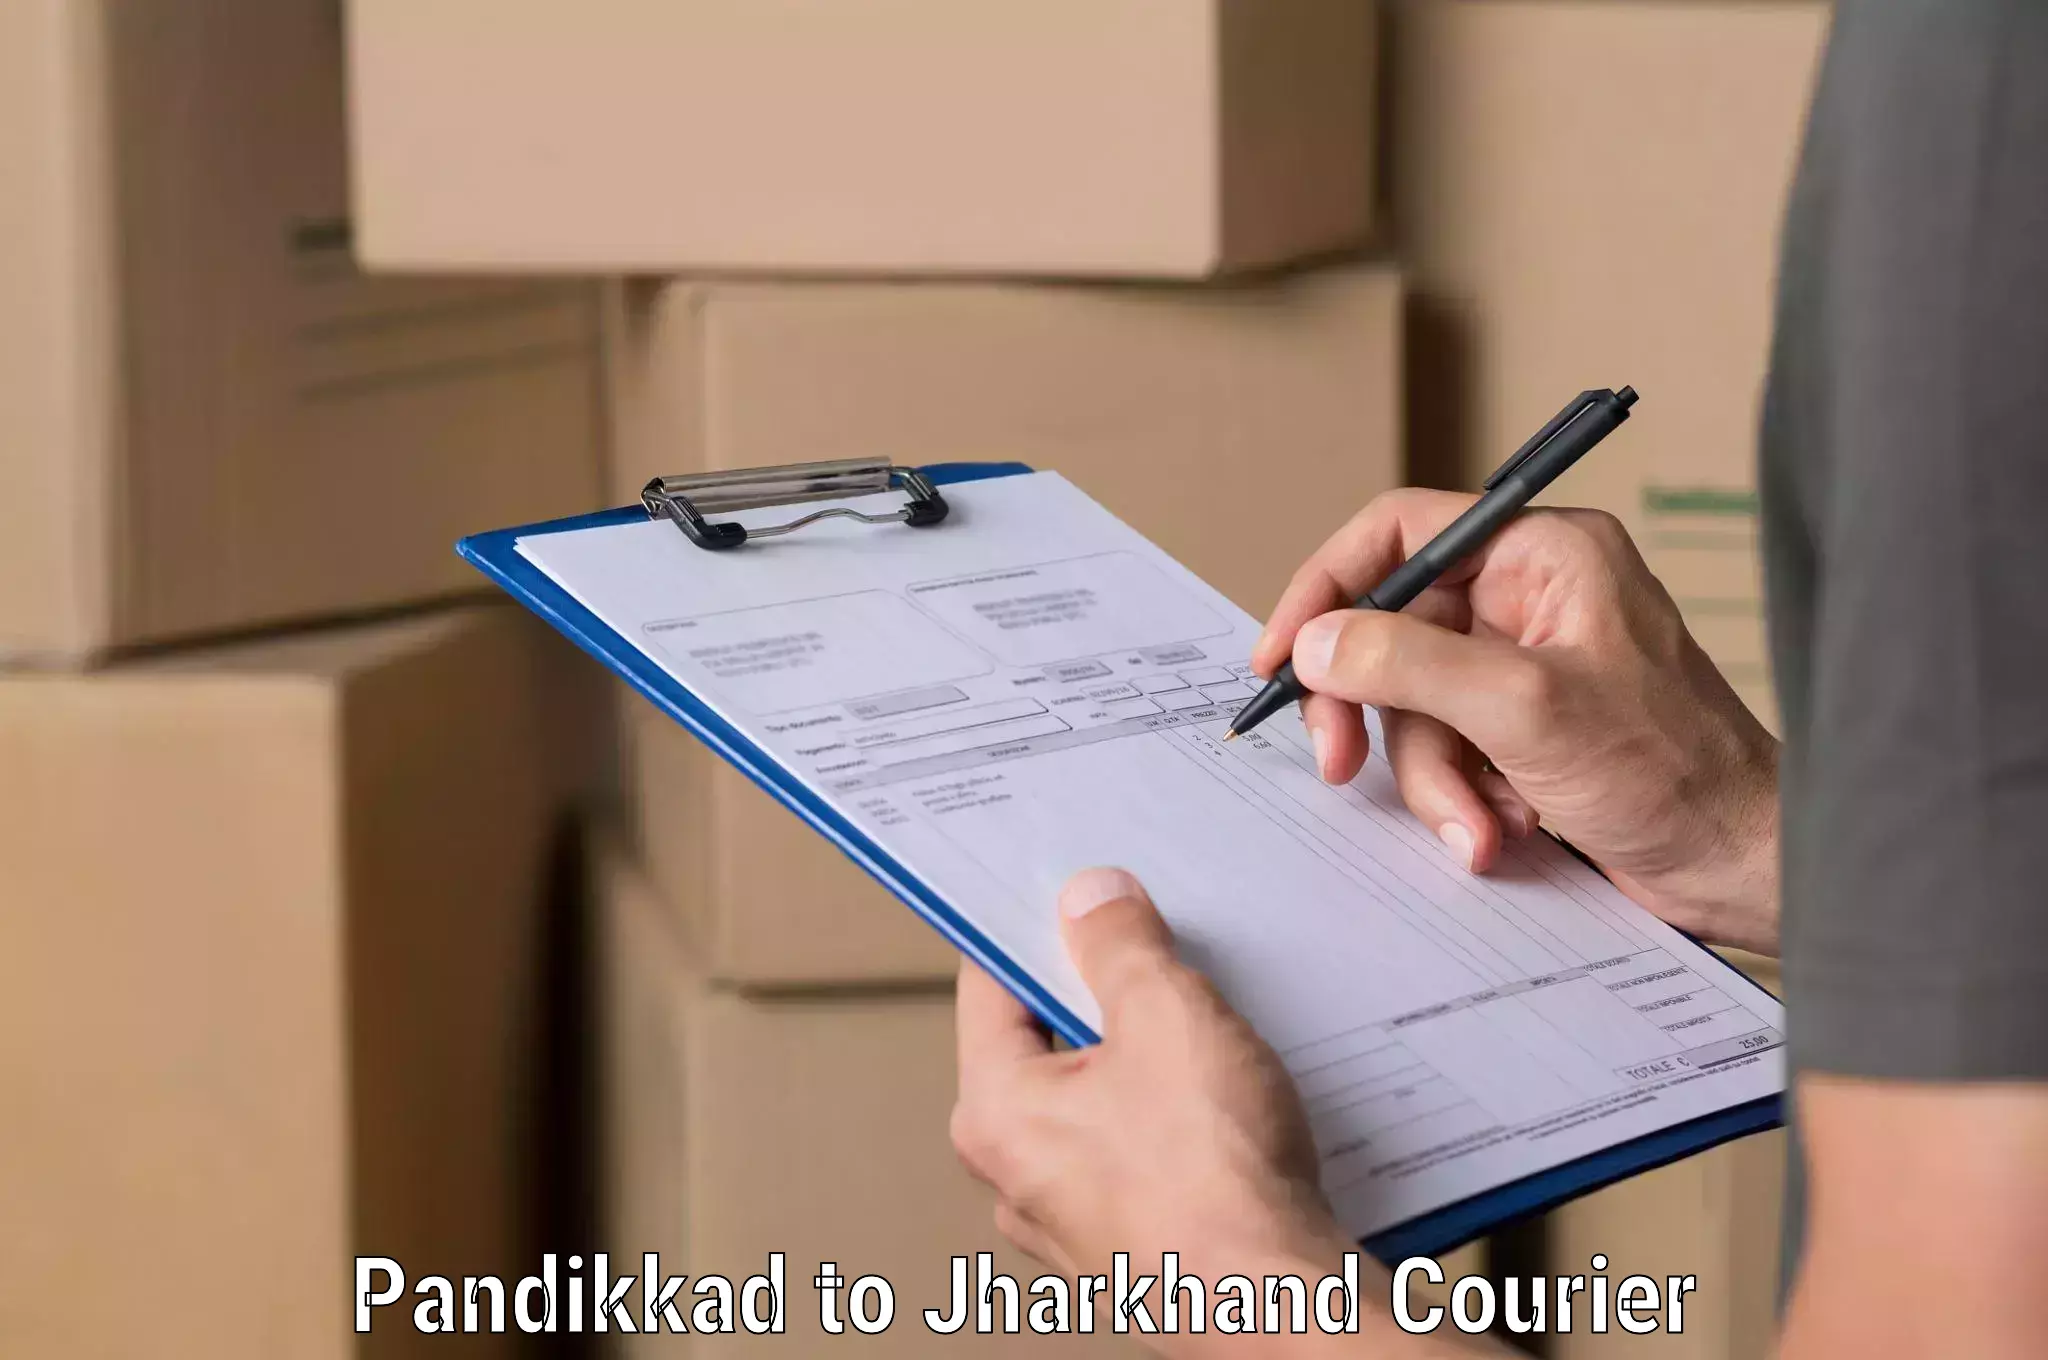 Global courier networks Pandikkad to West Singhbhum